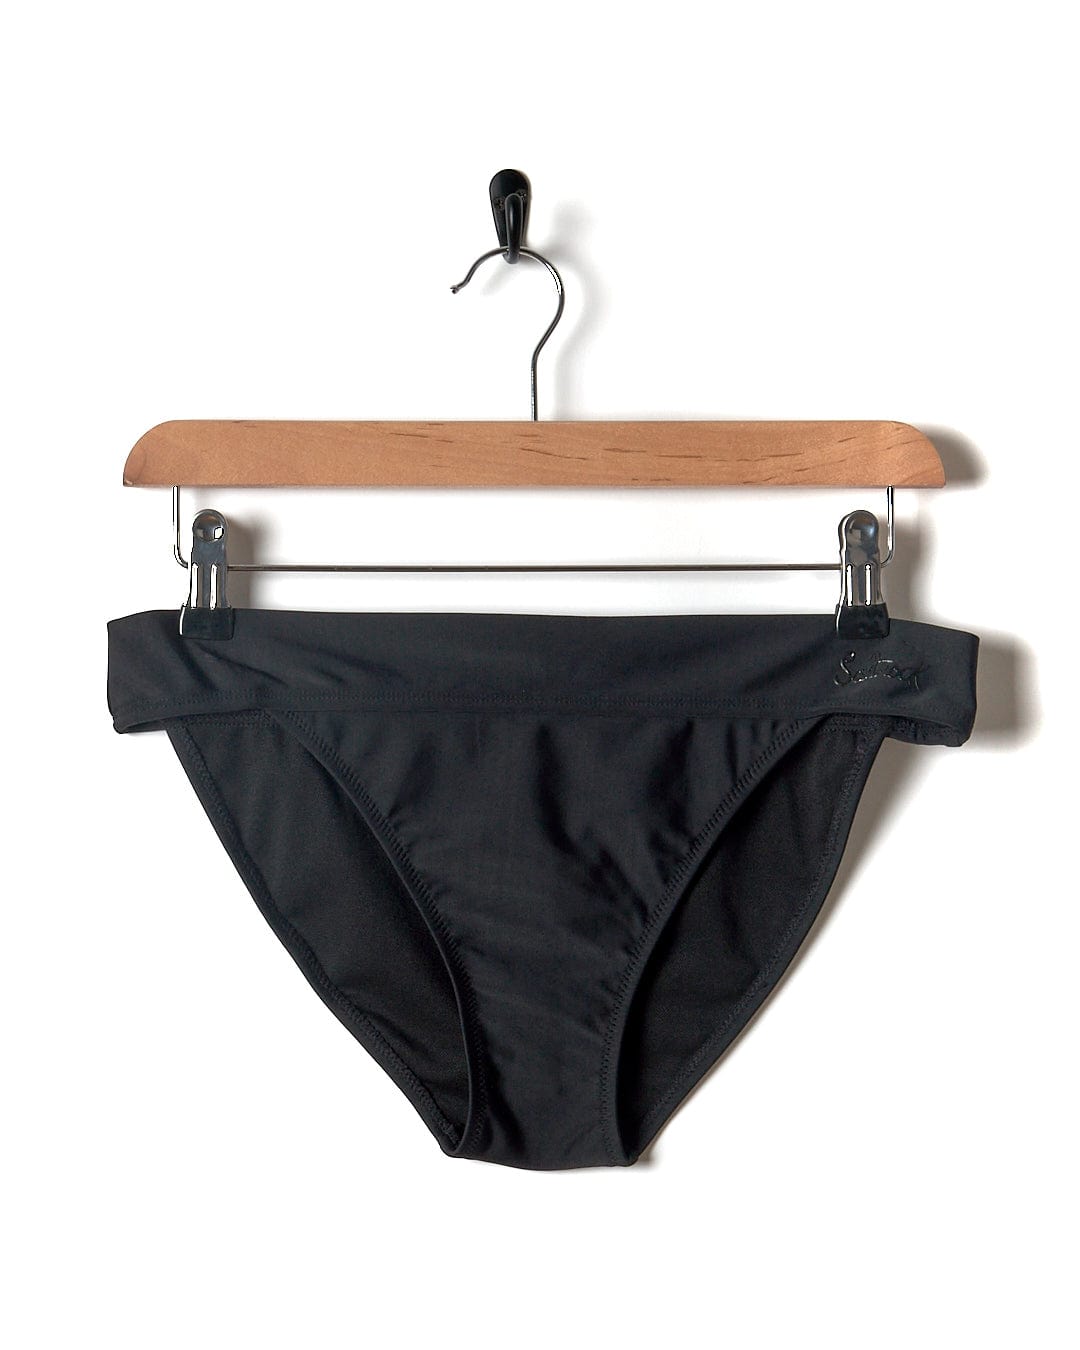 A Rosie - Womens Bikini Bottom - Black hanging on a hanger, perfect for a beach or pool day by Saltrock.